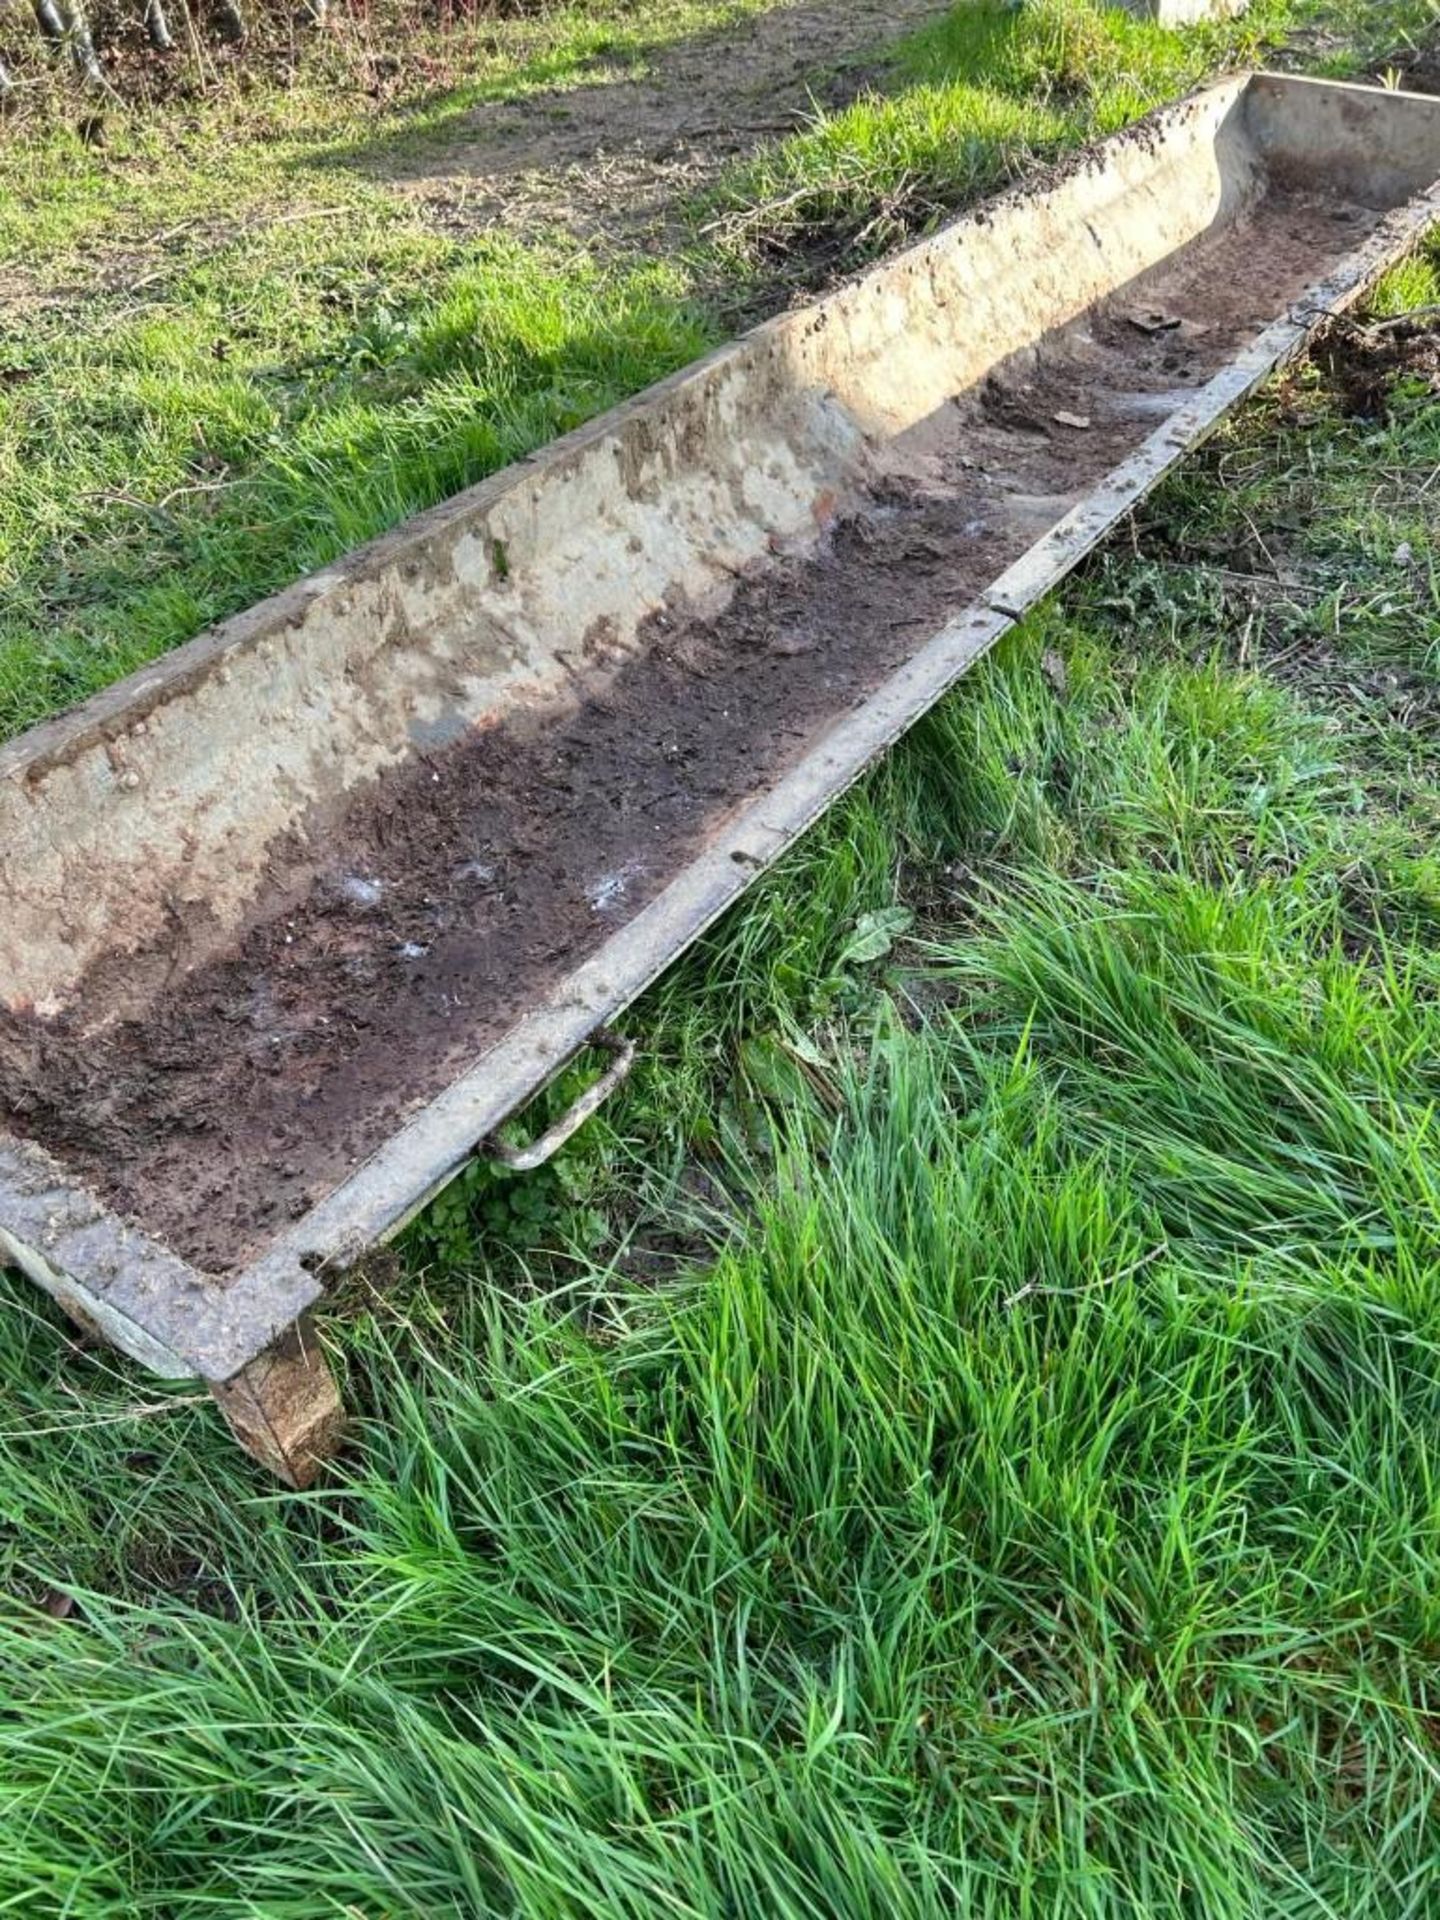 Cattle 10Ft Feed Trough - (Essex) - Image 2 of 3